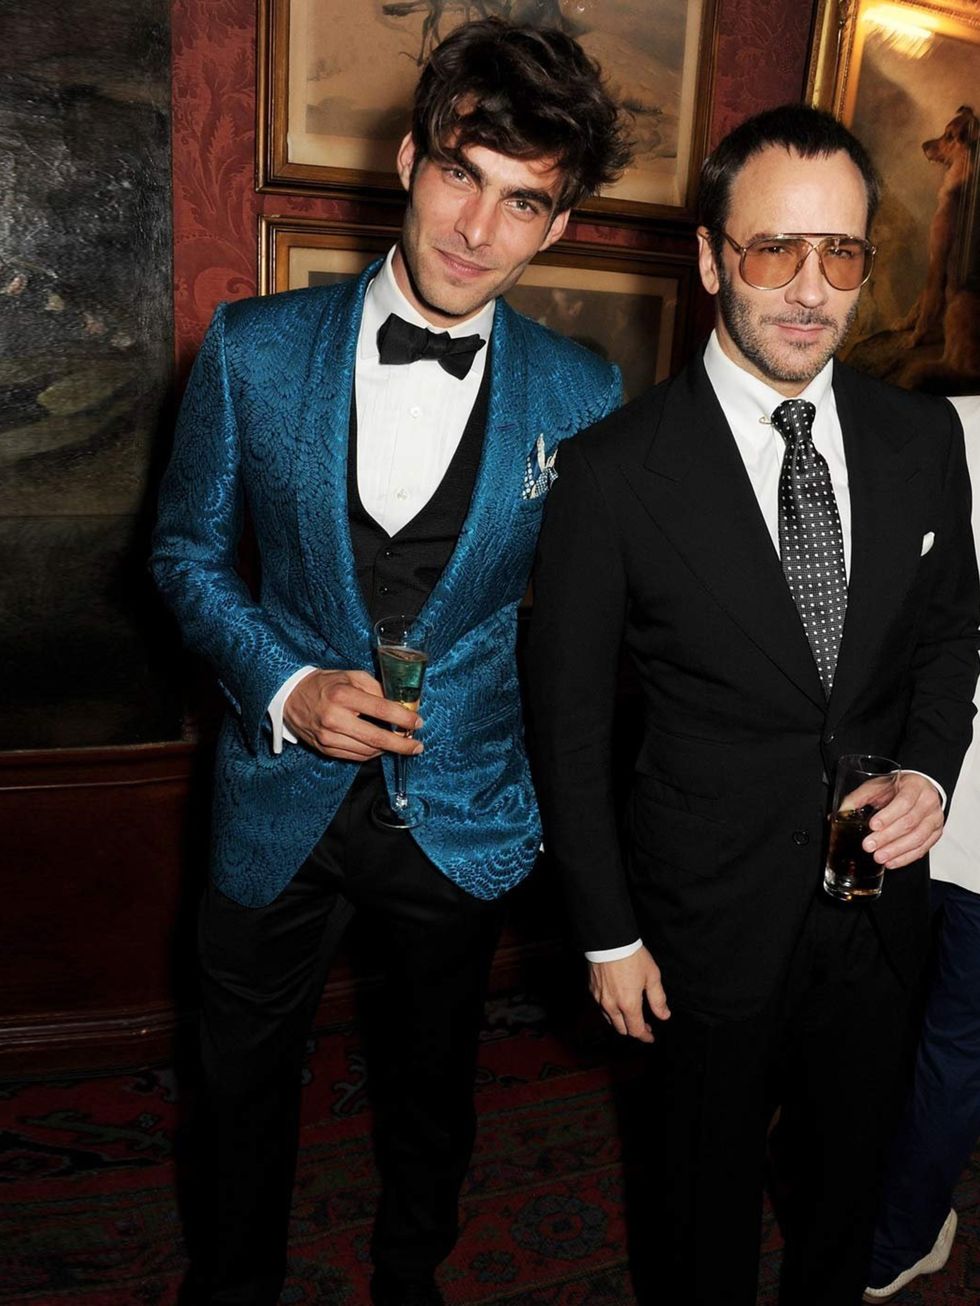 <p>Tom Ford and model Jon Kortajarena at the <a href="http://www.elleuk.com/catwalk/designer-a-z/tom-ford/autumn-winter-2013">Tom Ford</a> Mens Grooming Collection launch at Mark's Club on 18 June 2013.</p>